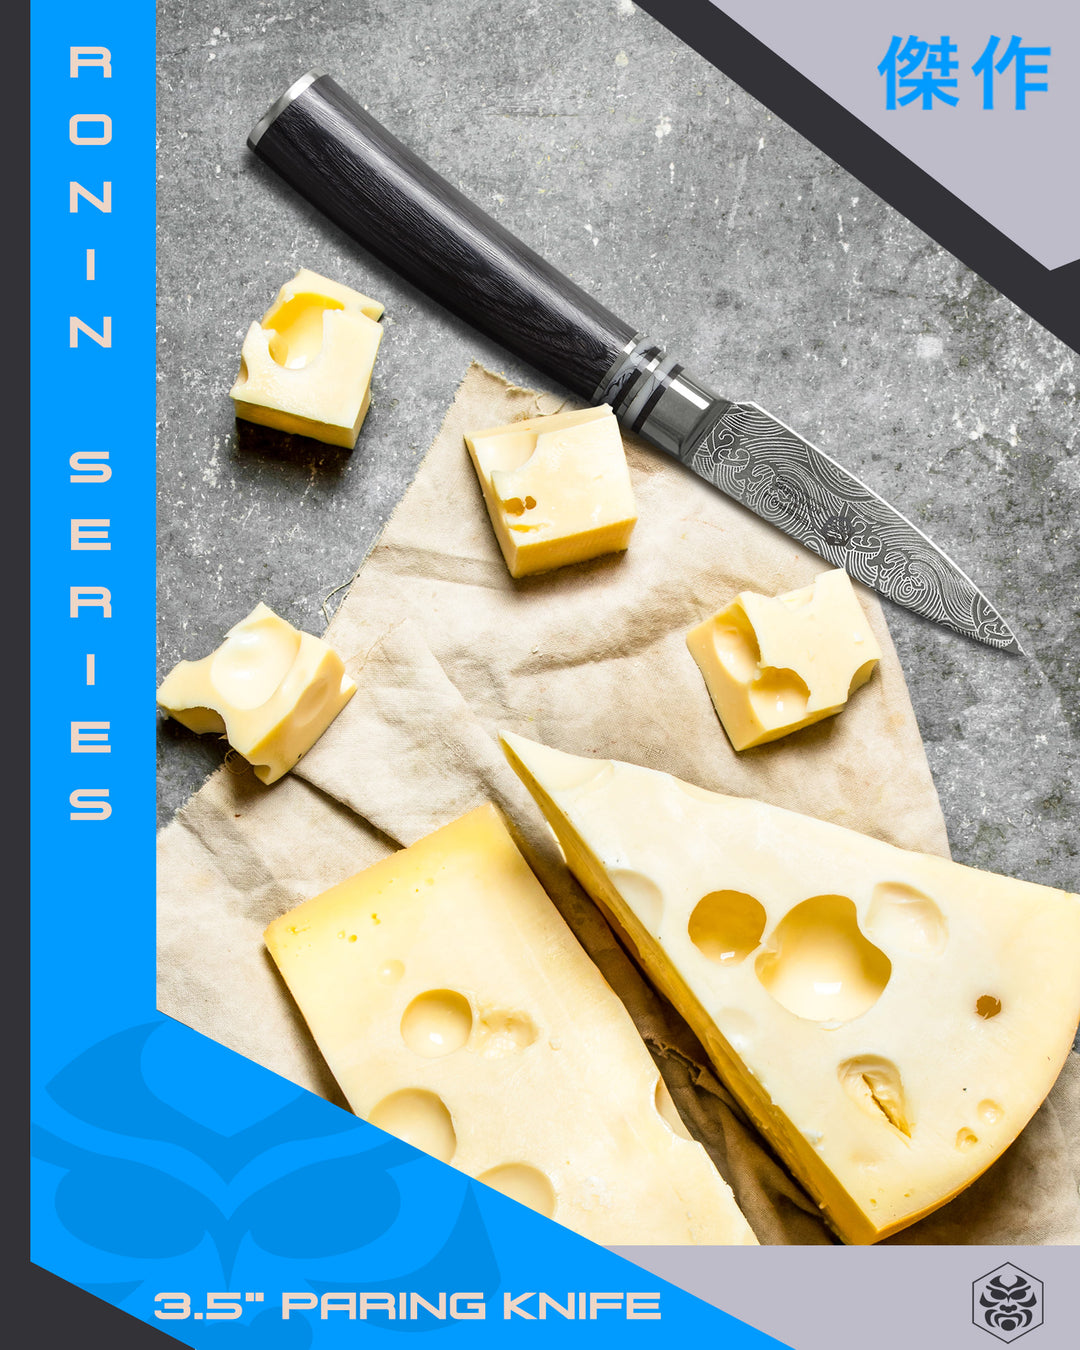 Chunks of swiss cheese cubed using the Ronin Paring Knife